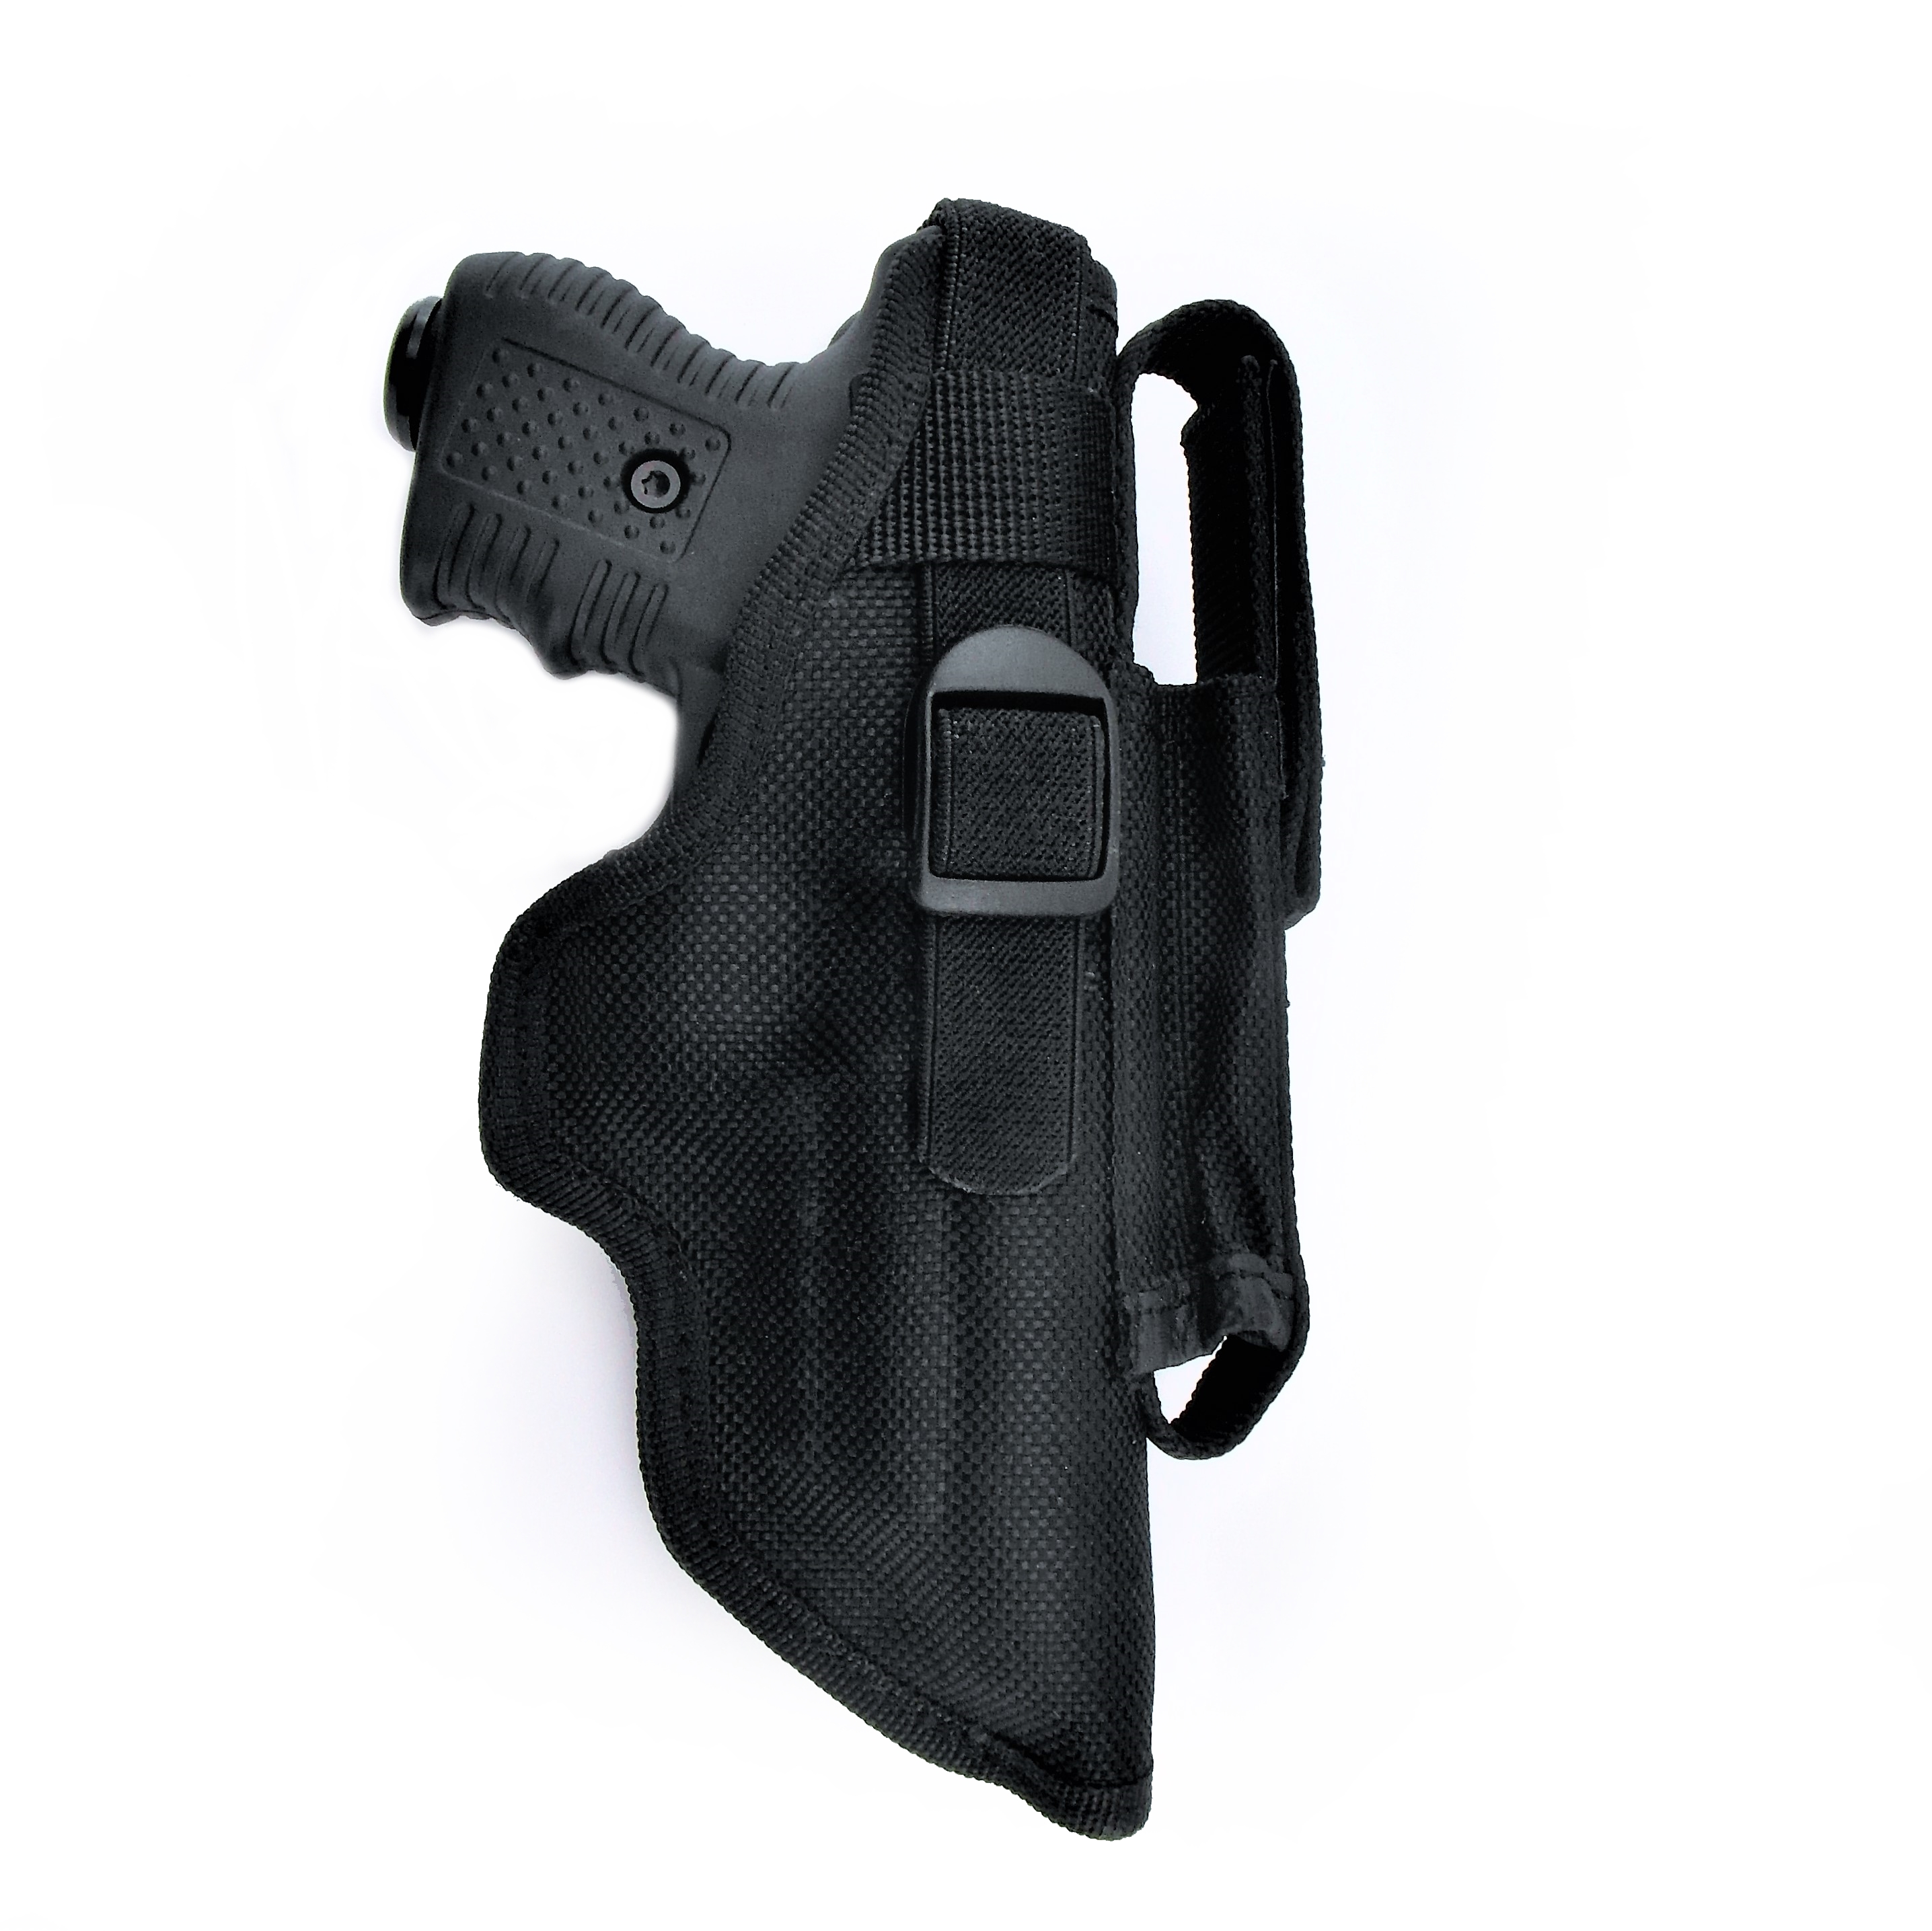 Holster fpr Piexon Jet Protector JPX